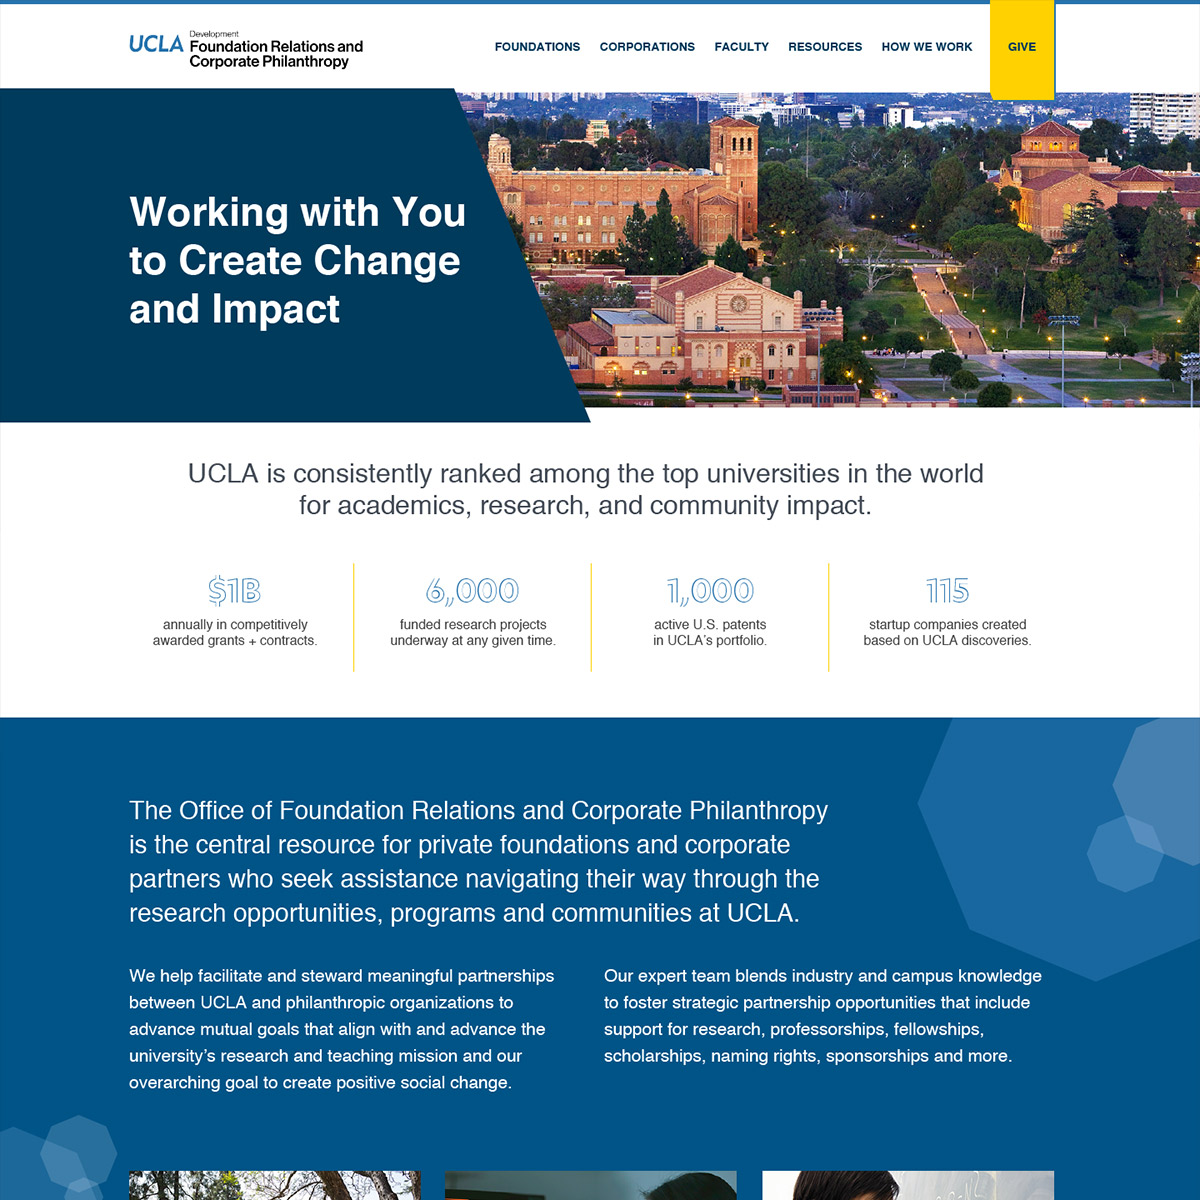 UCLA Office of Foundation Relations and Corporate Philanthropy website design